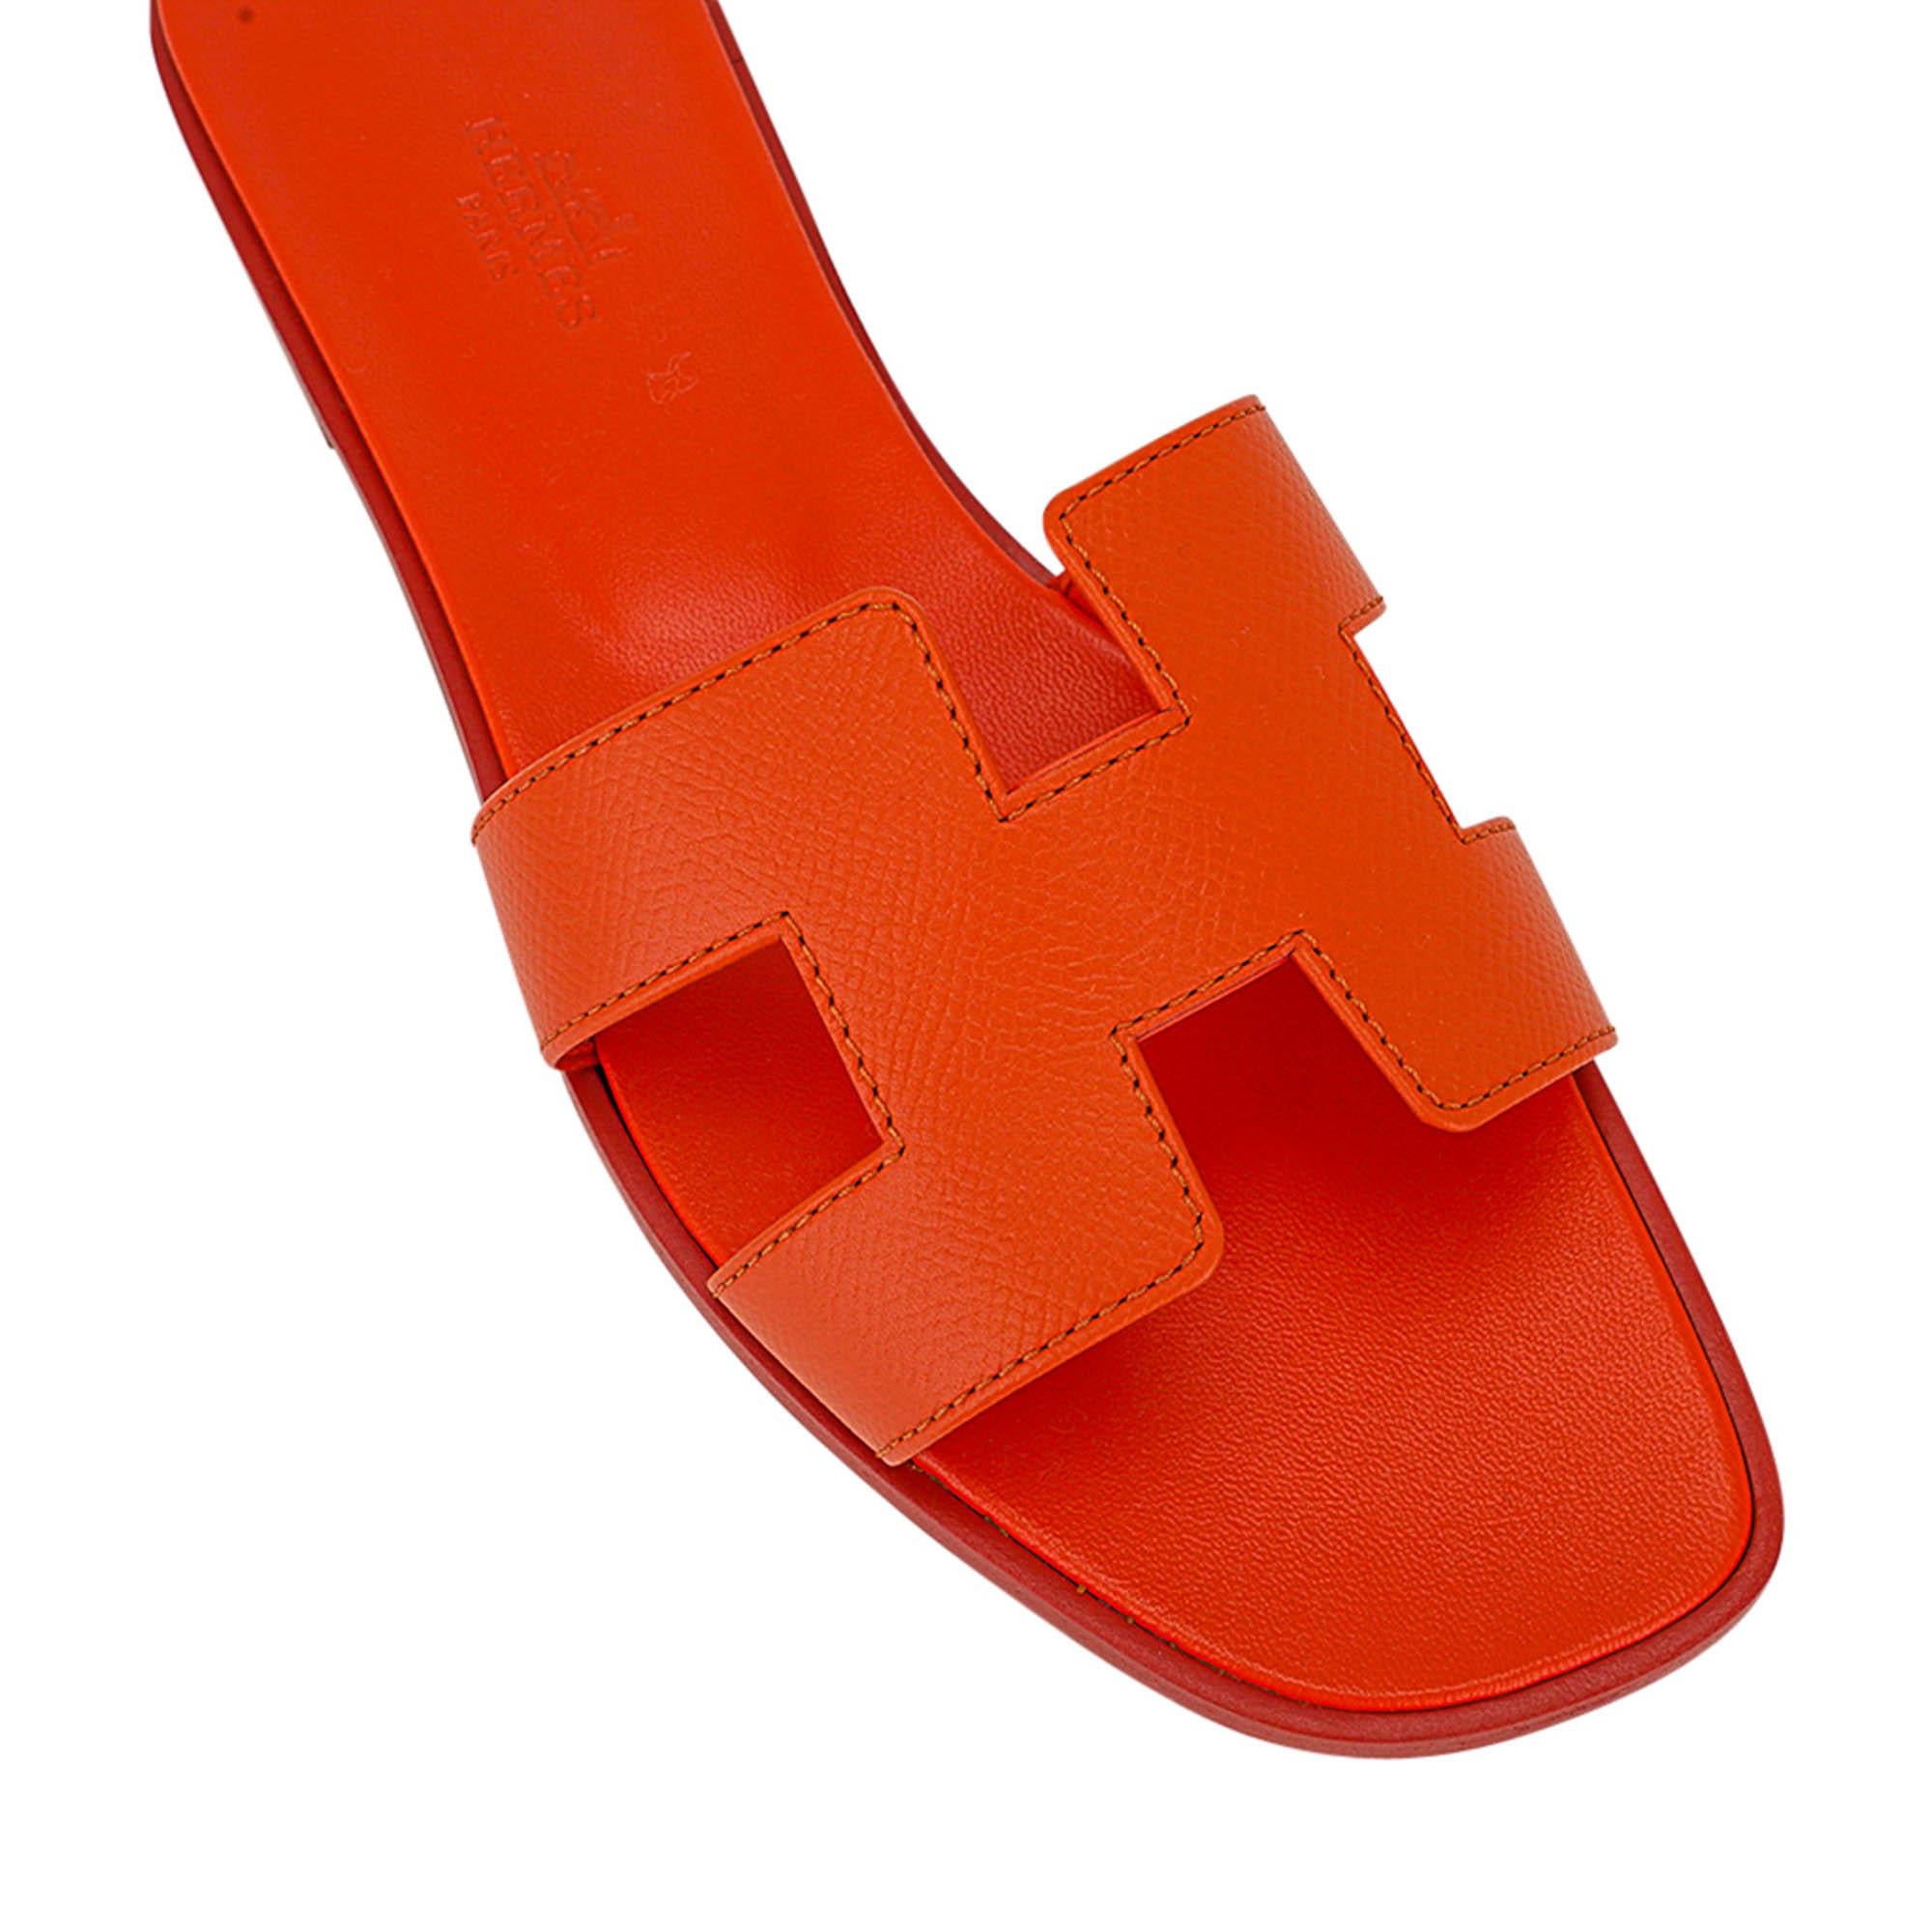 Mightychic offers Hermes Oran sandals featured in Orange.
Thirst quenching classic cult Orange epsom leather Hermes Oran slide sandal. 
The iconic H cutout over the top of the foot.
Matching embossed calfskin insole.
Wood heel with leather